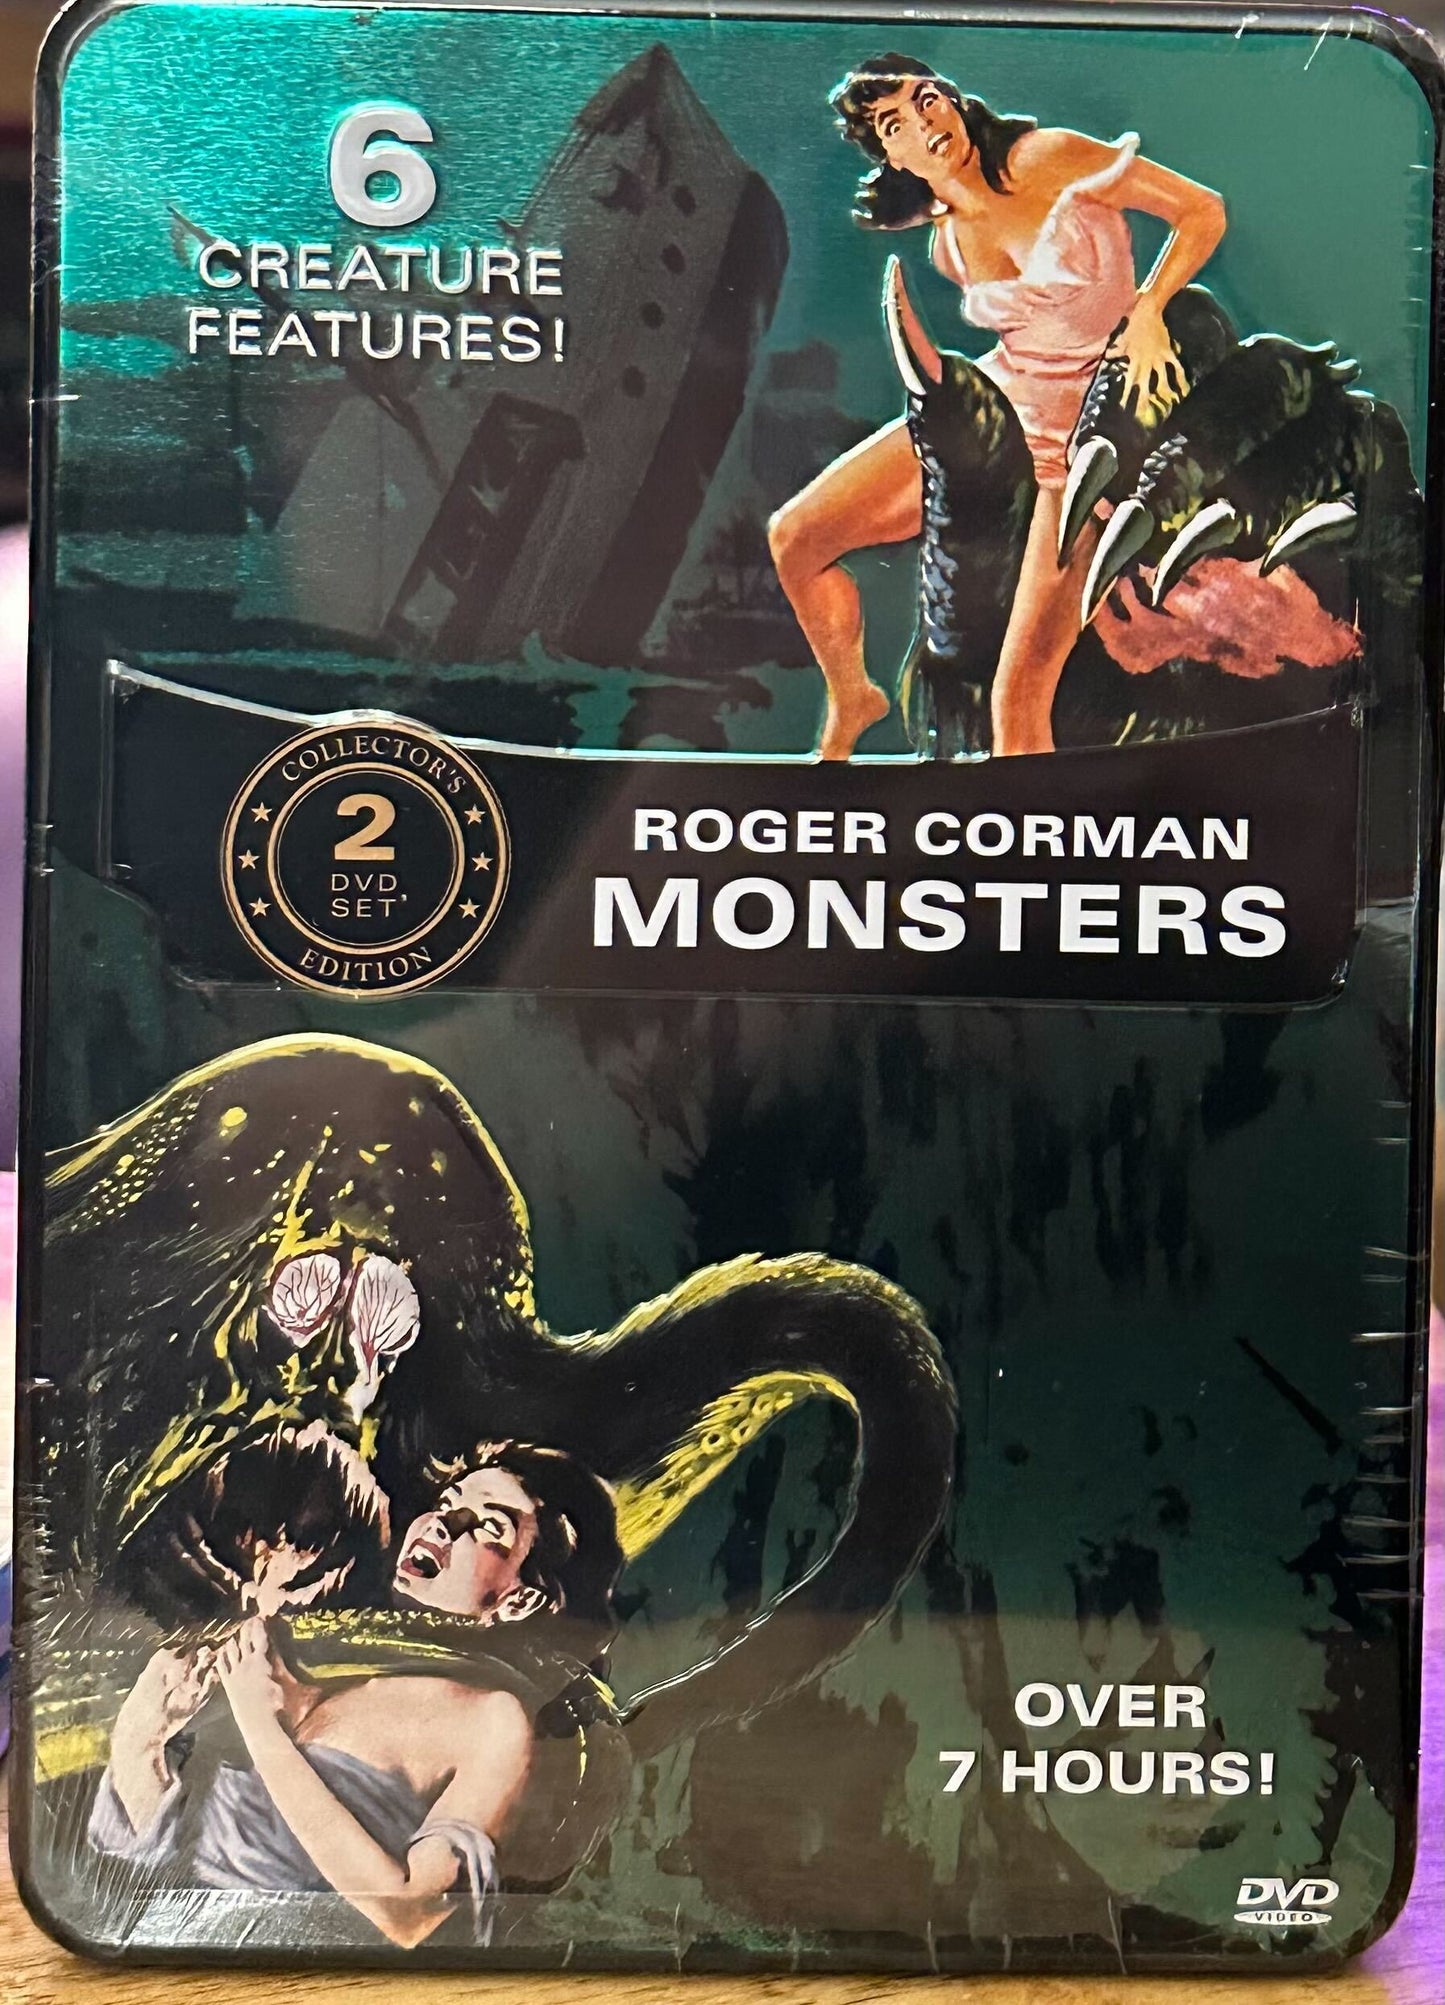 Roger Corman Monsters DVD Tin - 6 Creature Features!